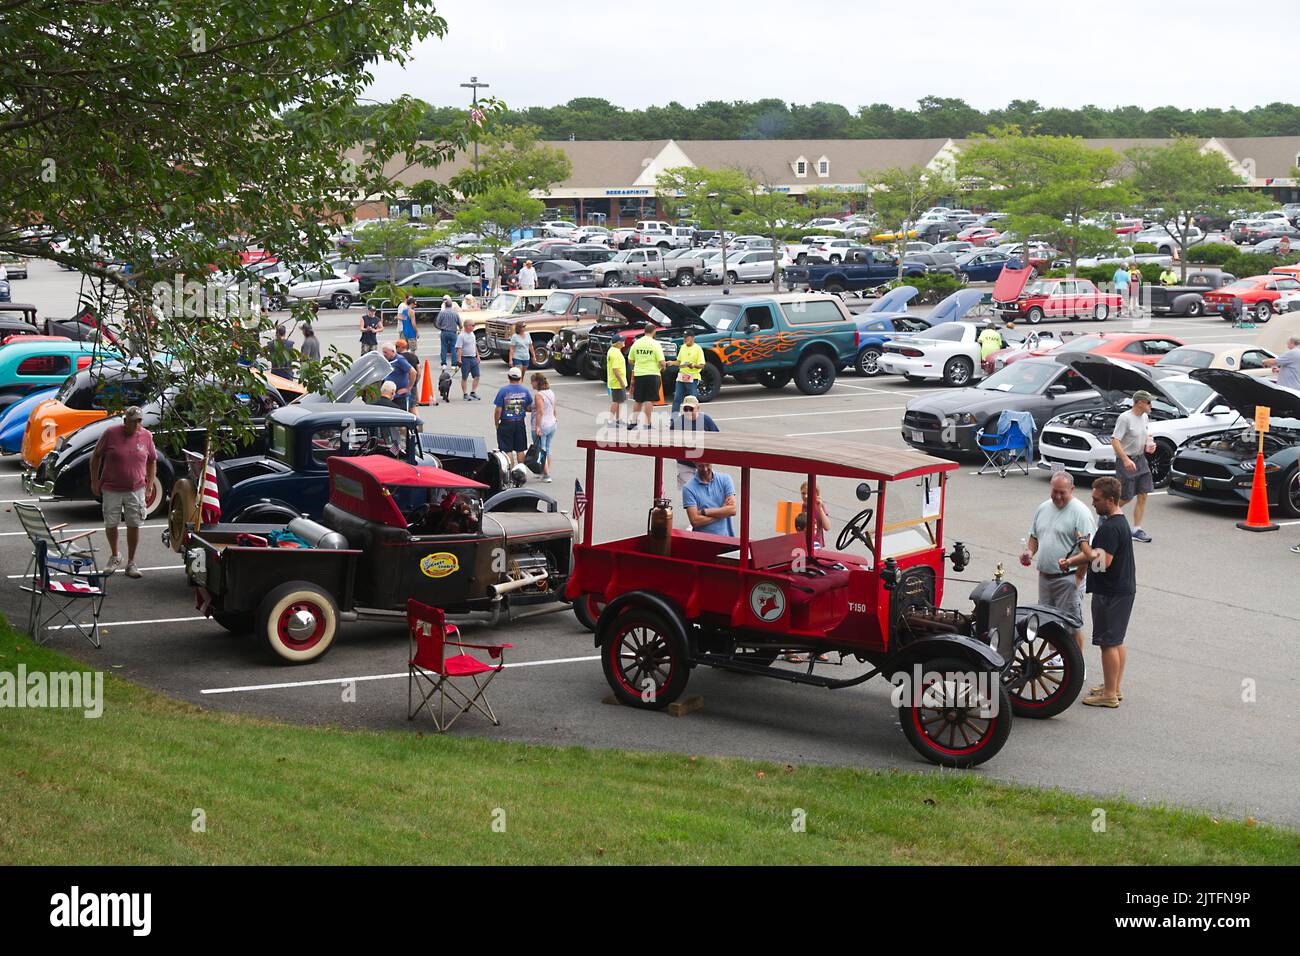 An overview of an outdoor auto show at Patriot Square, Dennis, Massachusetts, on Cape Cod, USA Stock Photo